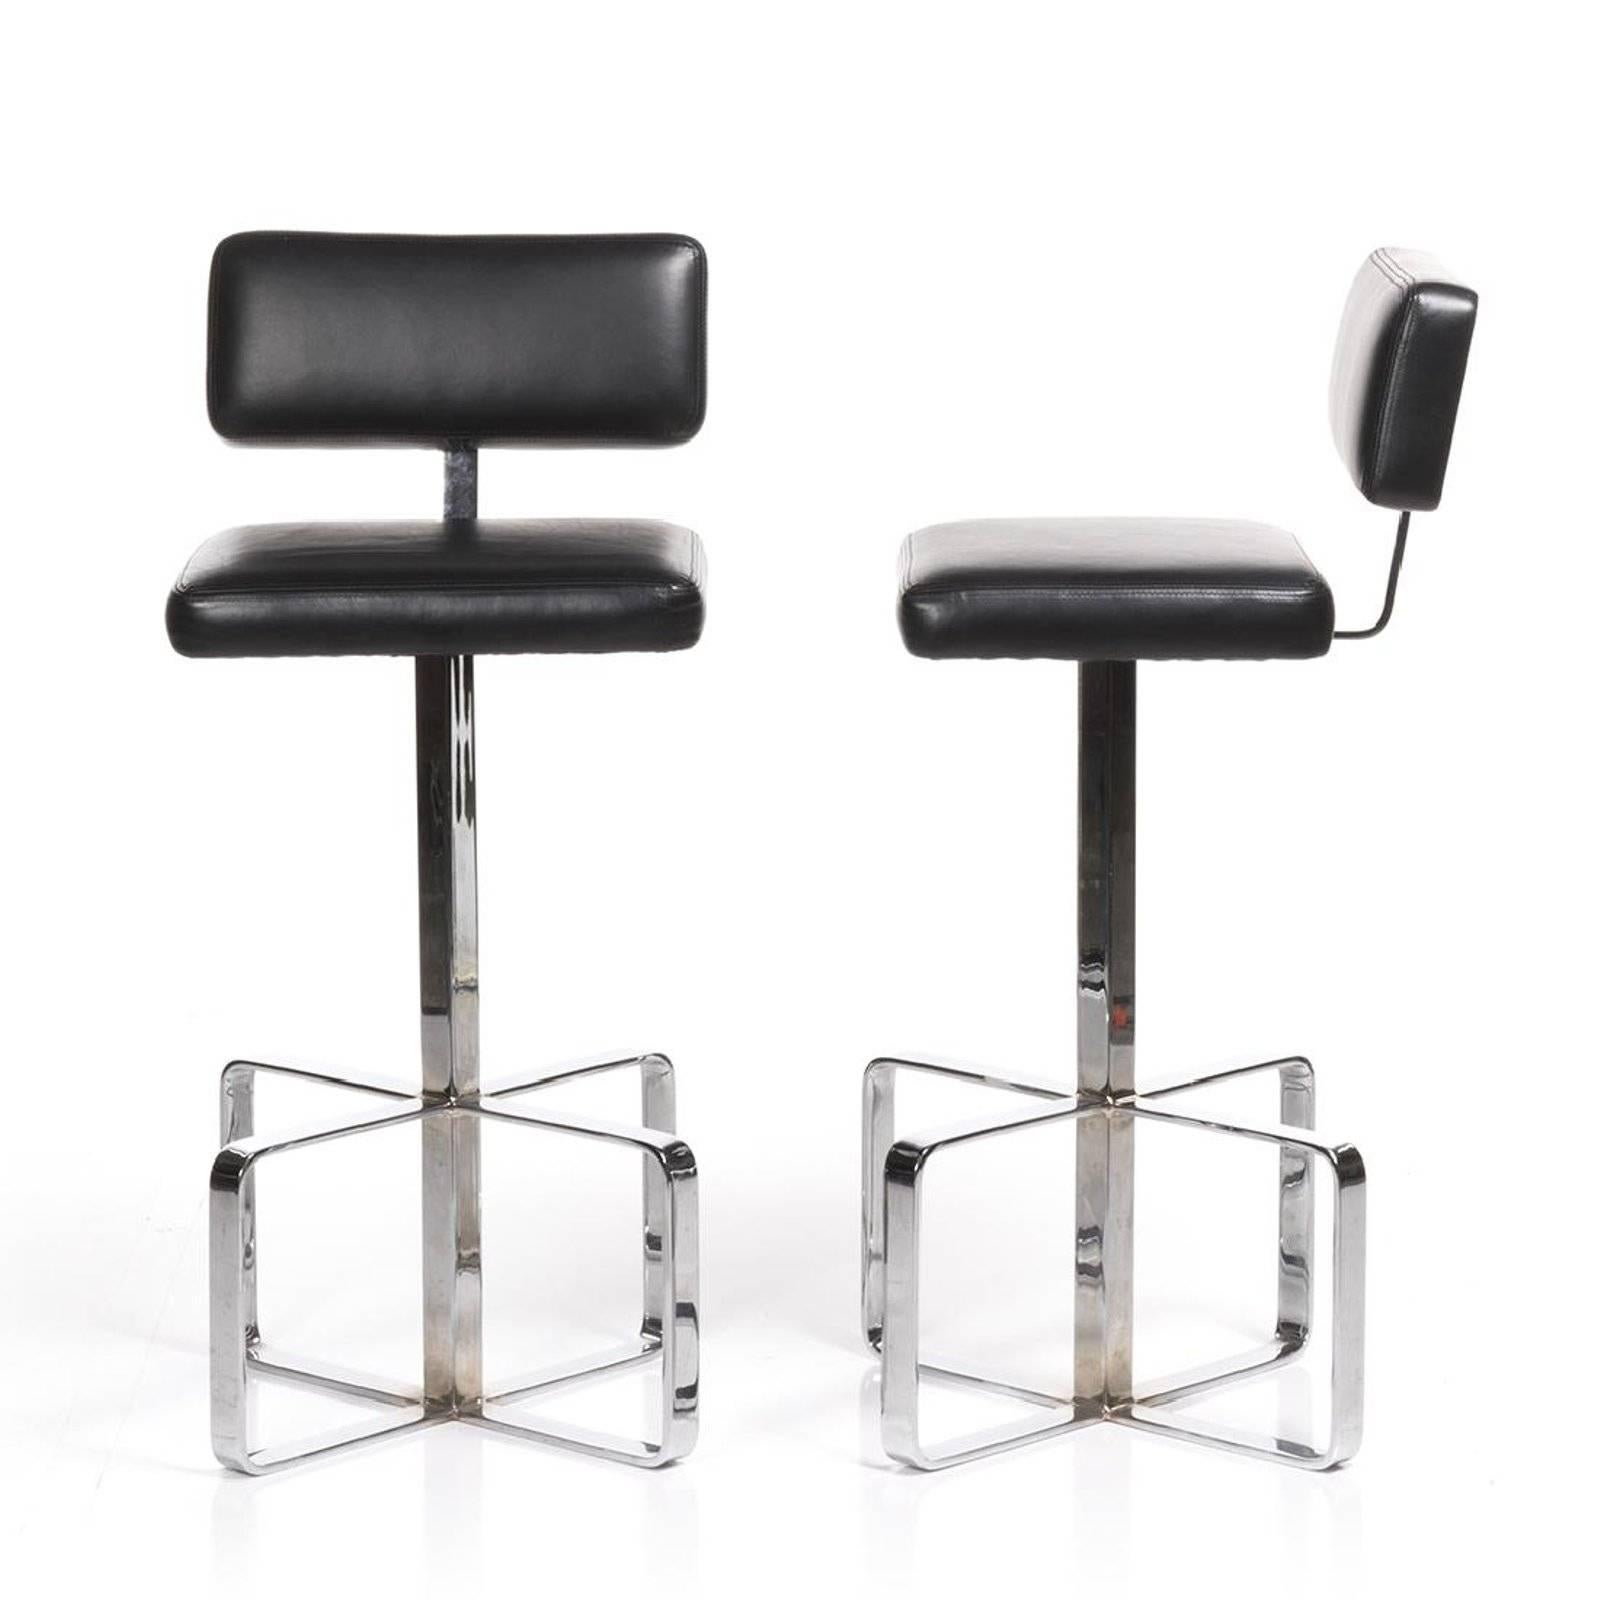 Pair of Italian leather and chrome swivel bar stools, circa 1970s.
In excellent used condition.
  